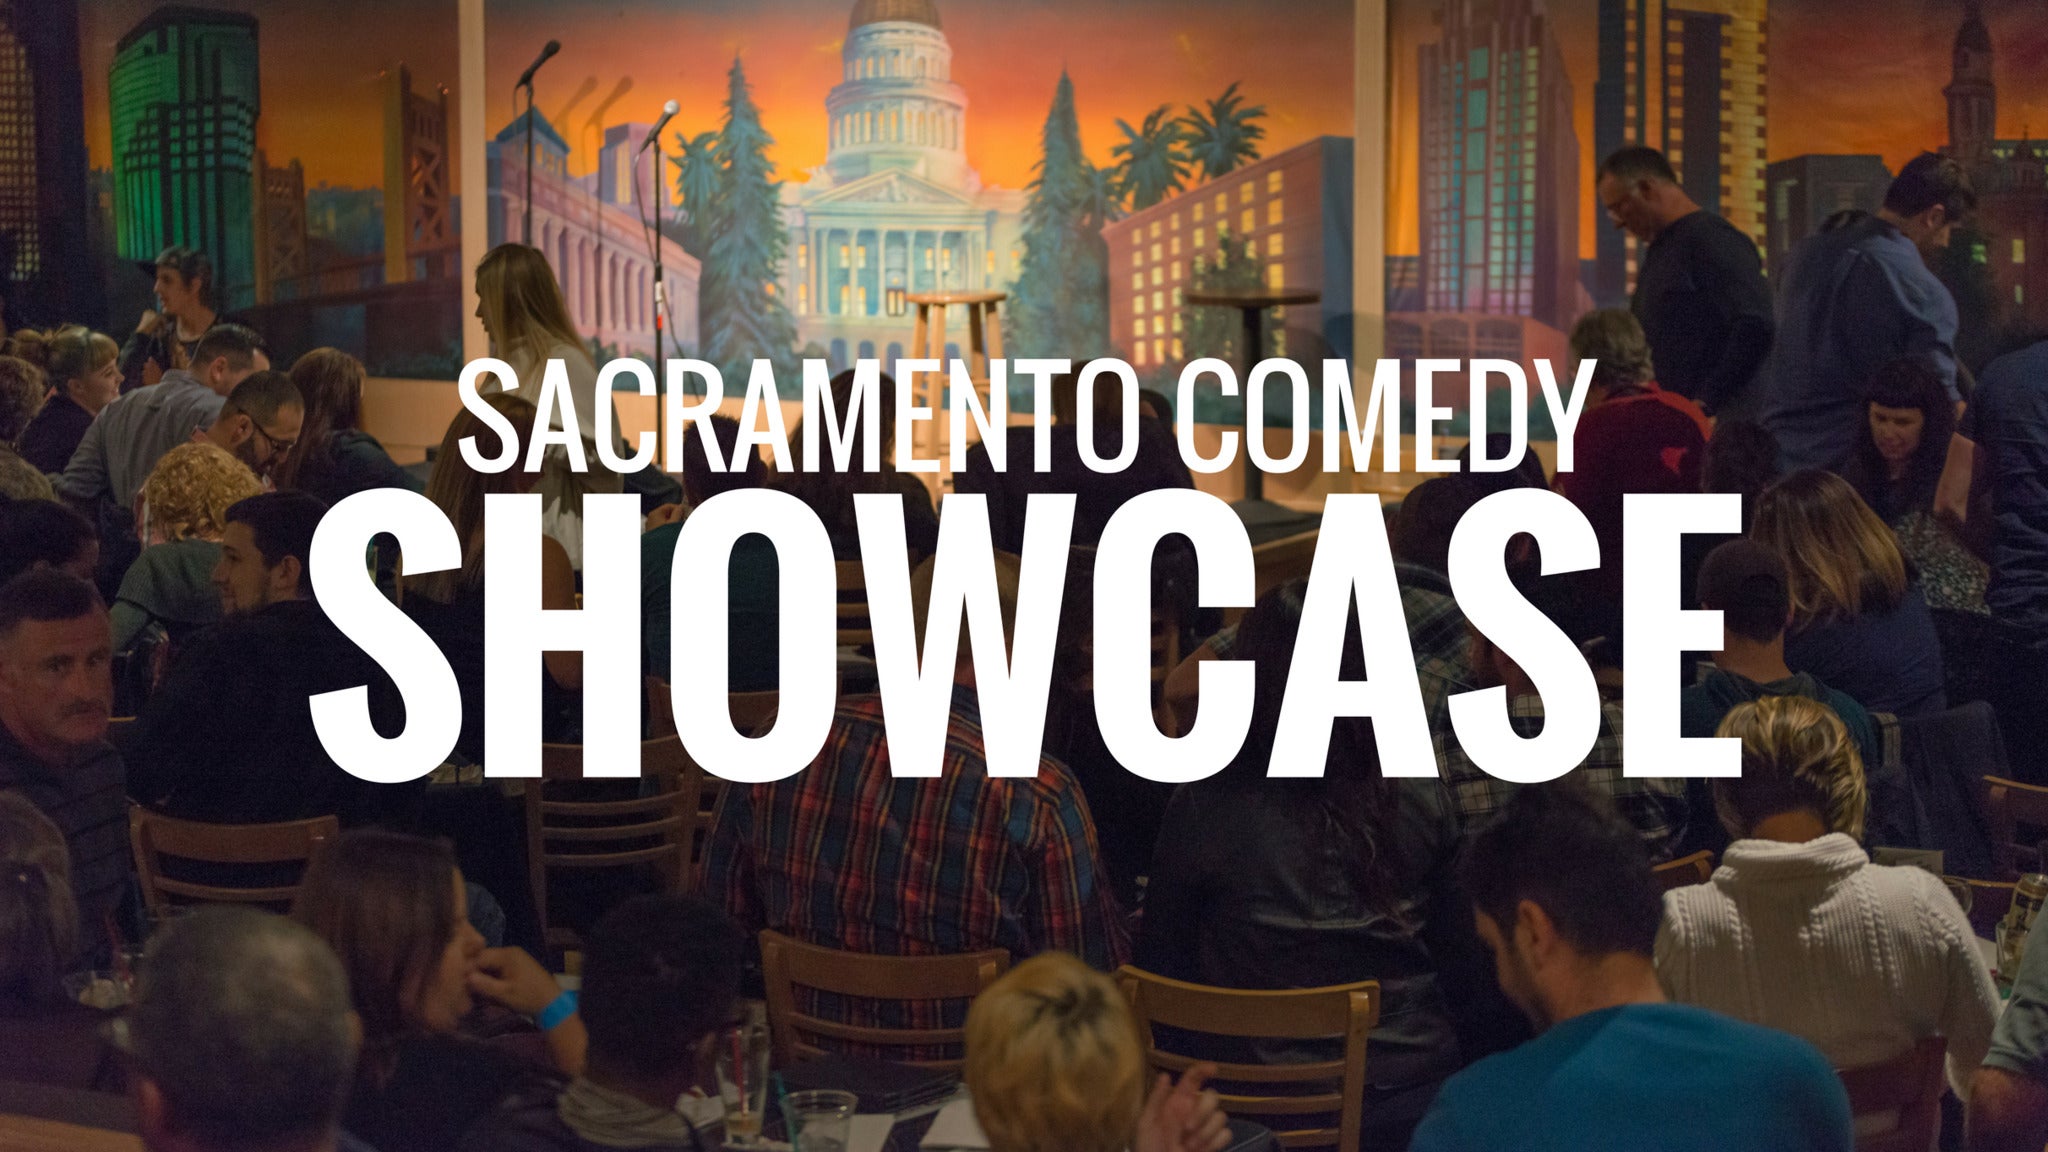 Image used with permission from Ticketmaster | Sacramento Comedy Showcase tickets